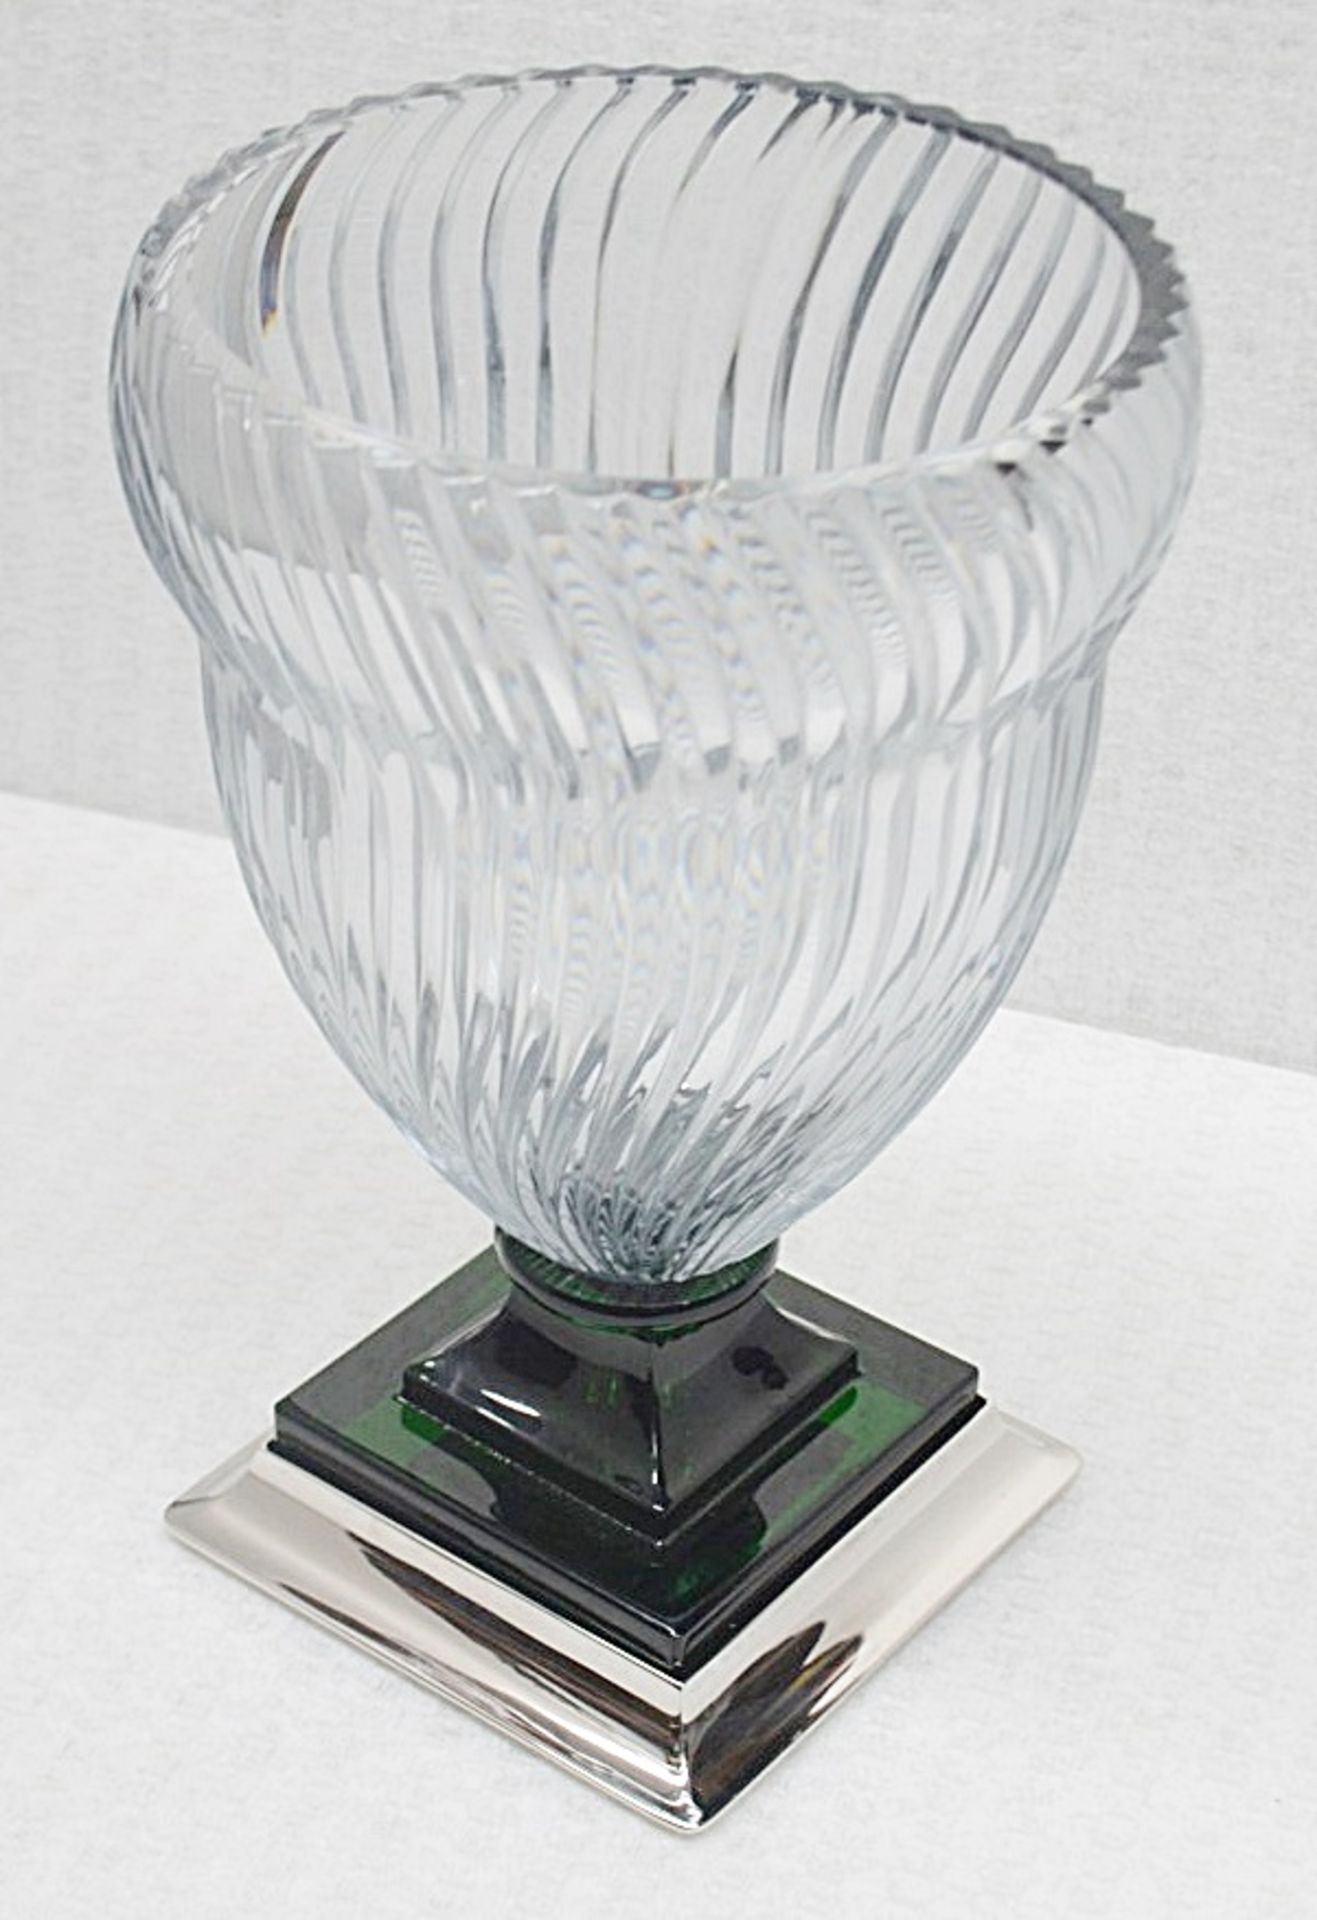 1 x BALDI 'Home Jewels' Italian Hand-crafted Artisan GHIAHDA VASE In A Green & Clear Crystal With - Image 2 of 4